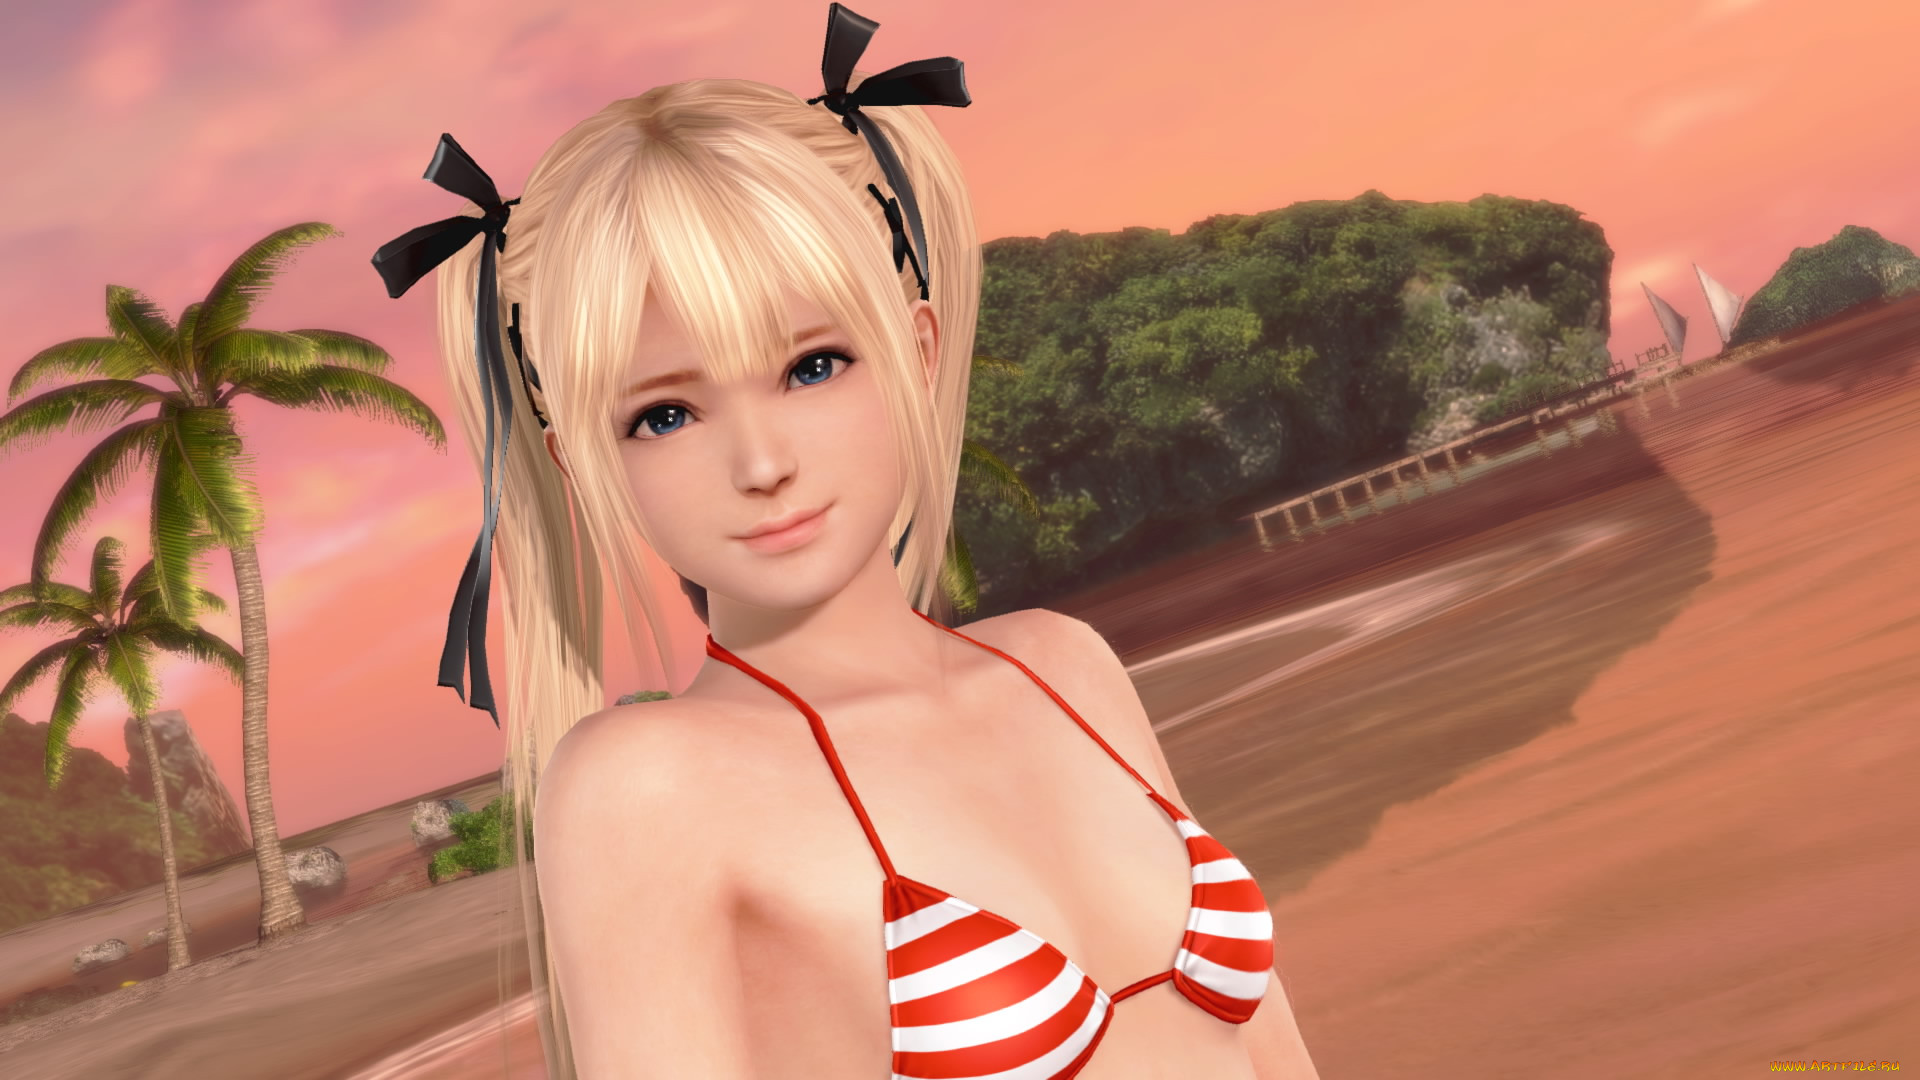 Marie Rose. Marie Rose Doa collection. Marie rose 3d